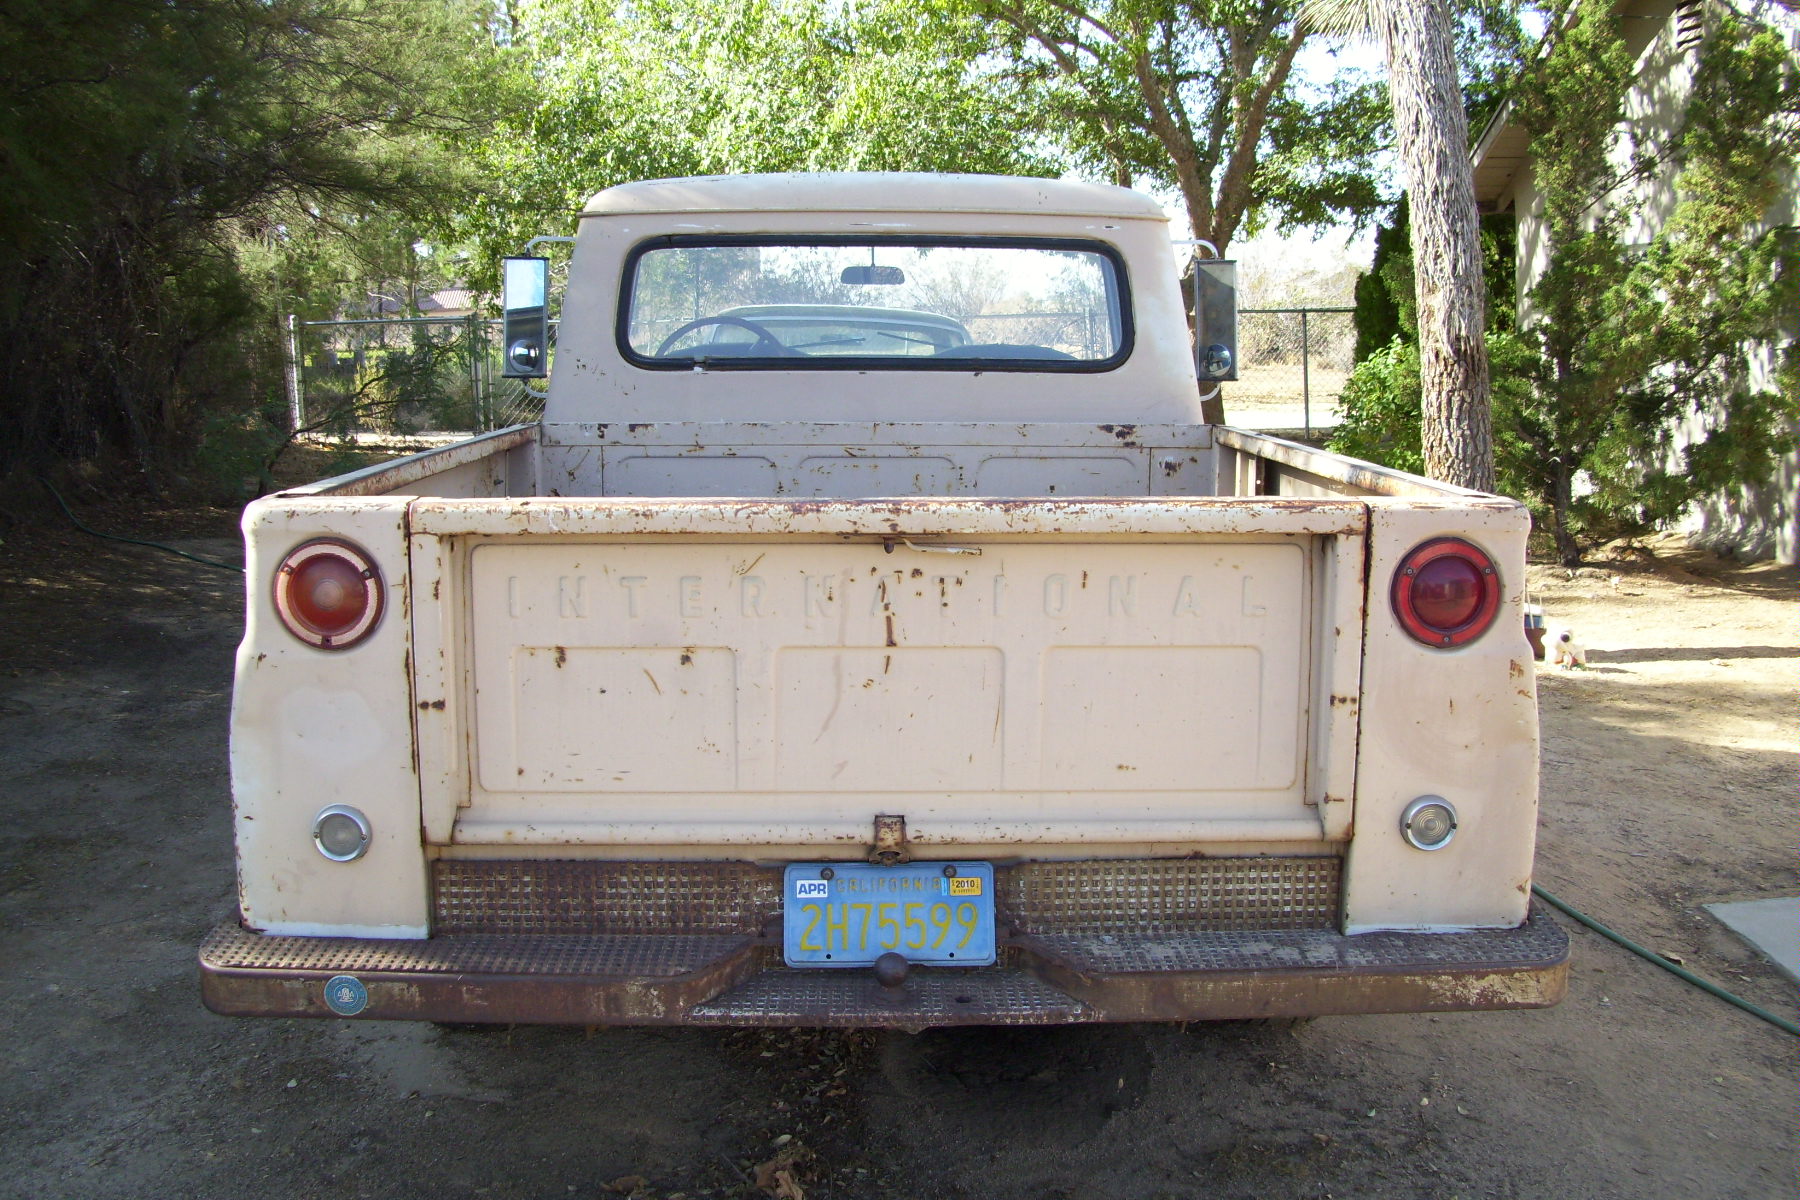 International Harvester Pickup Photo Gallery: Photo #04 out of 11 ...